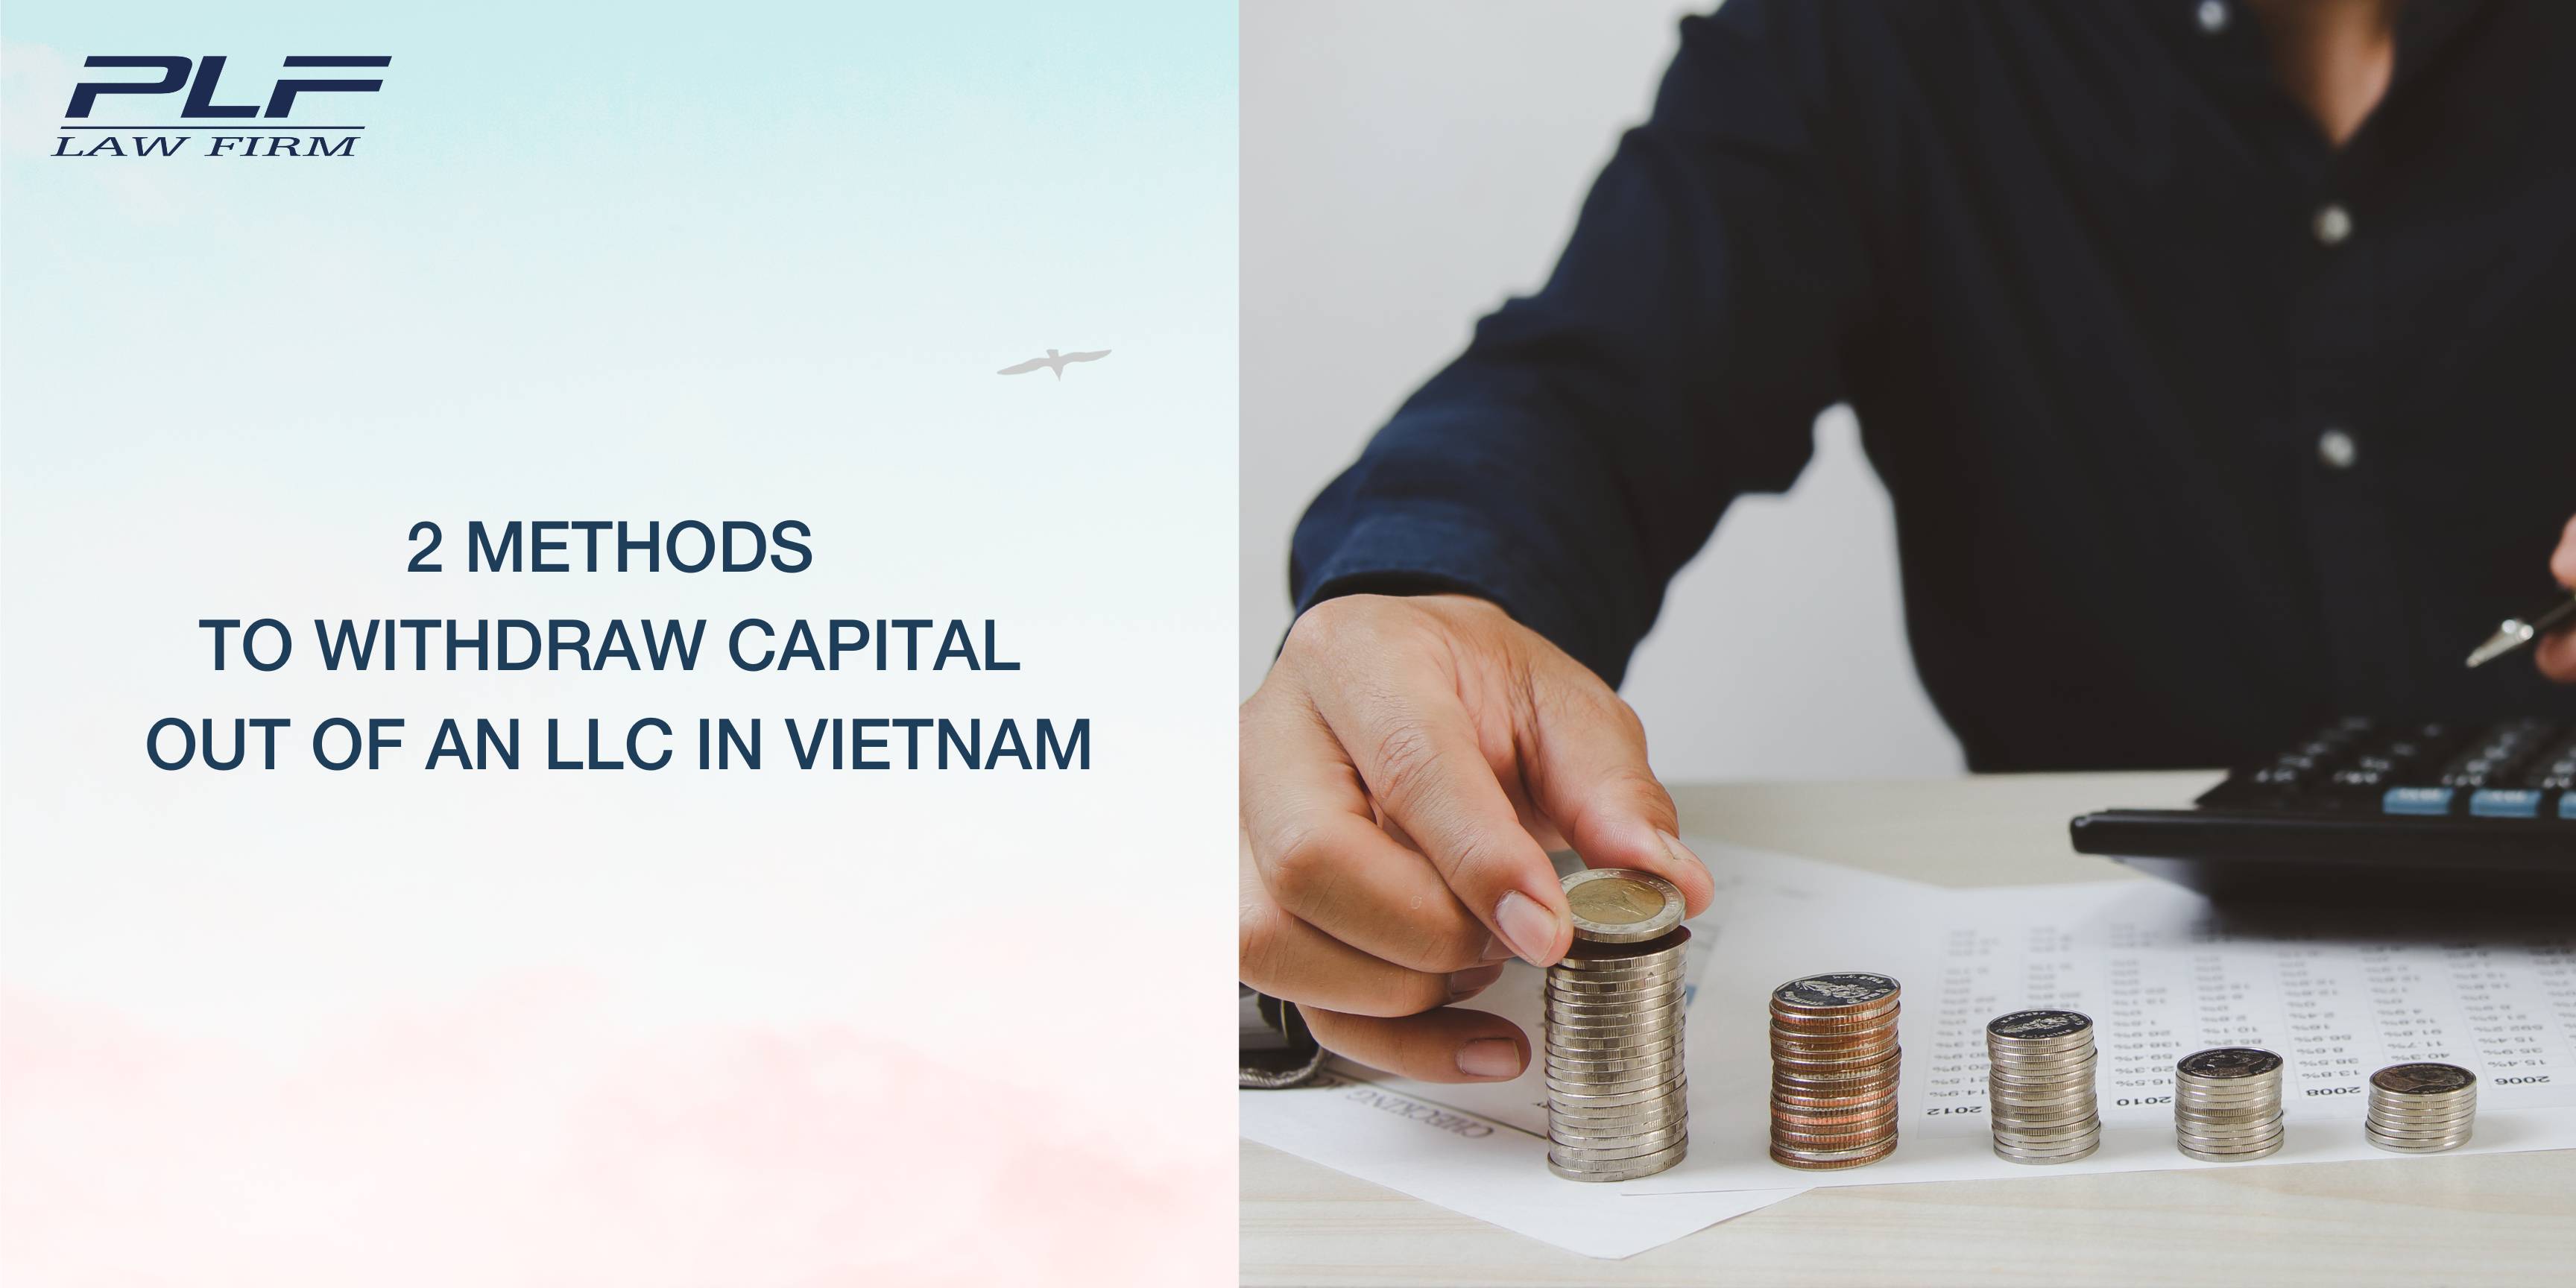 Plf 2 Methods To Withdraw Capital Out Of An Llc In Vietnam